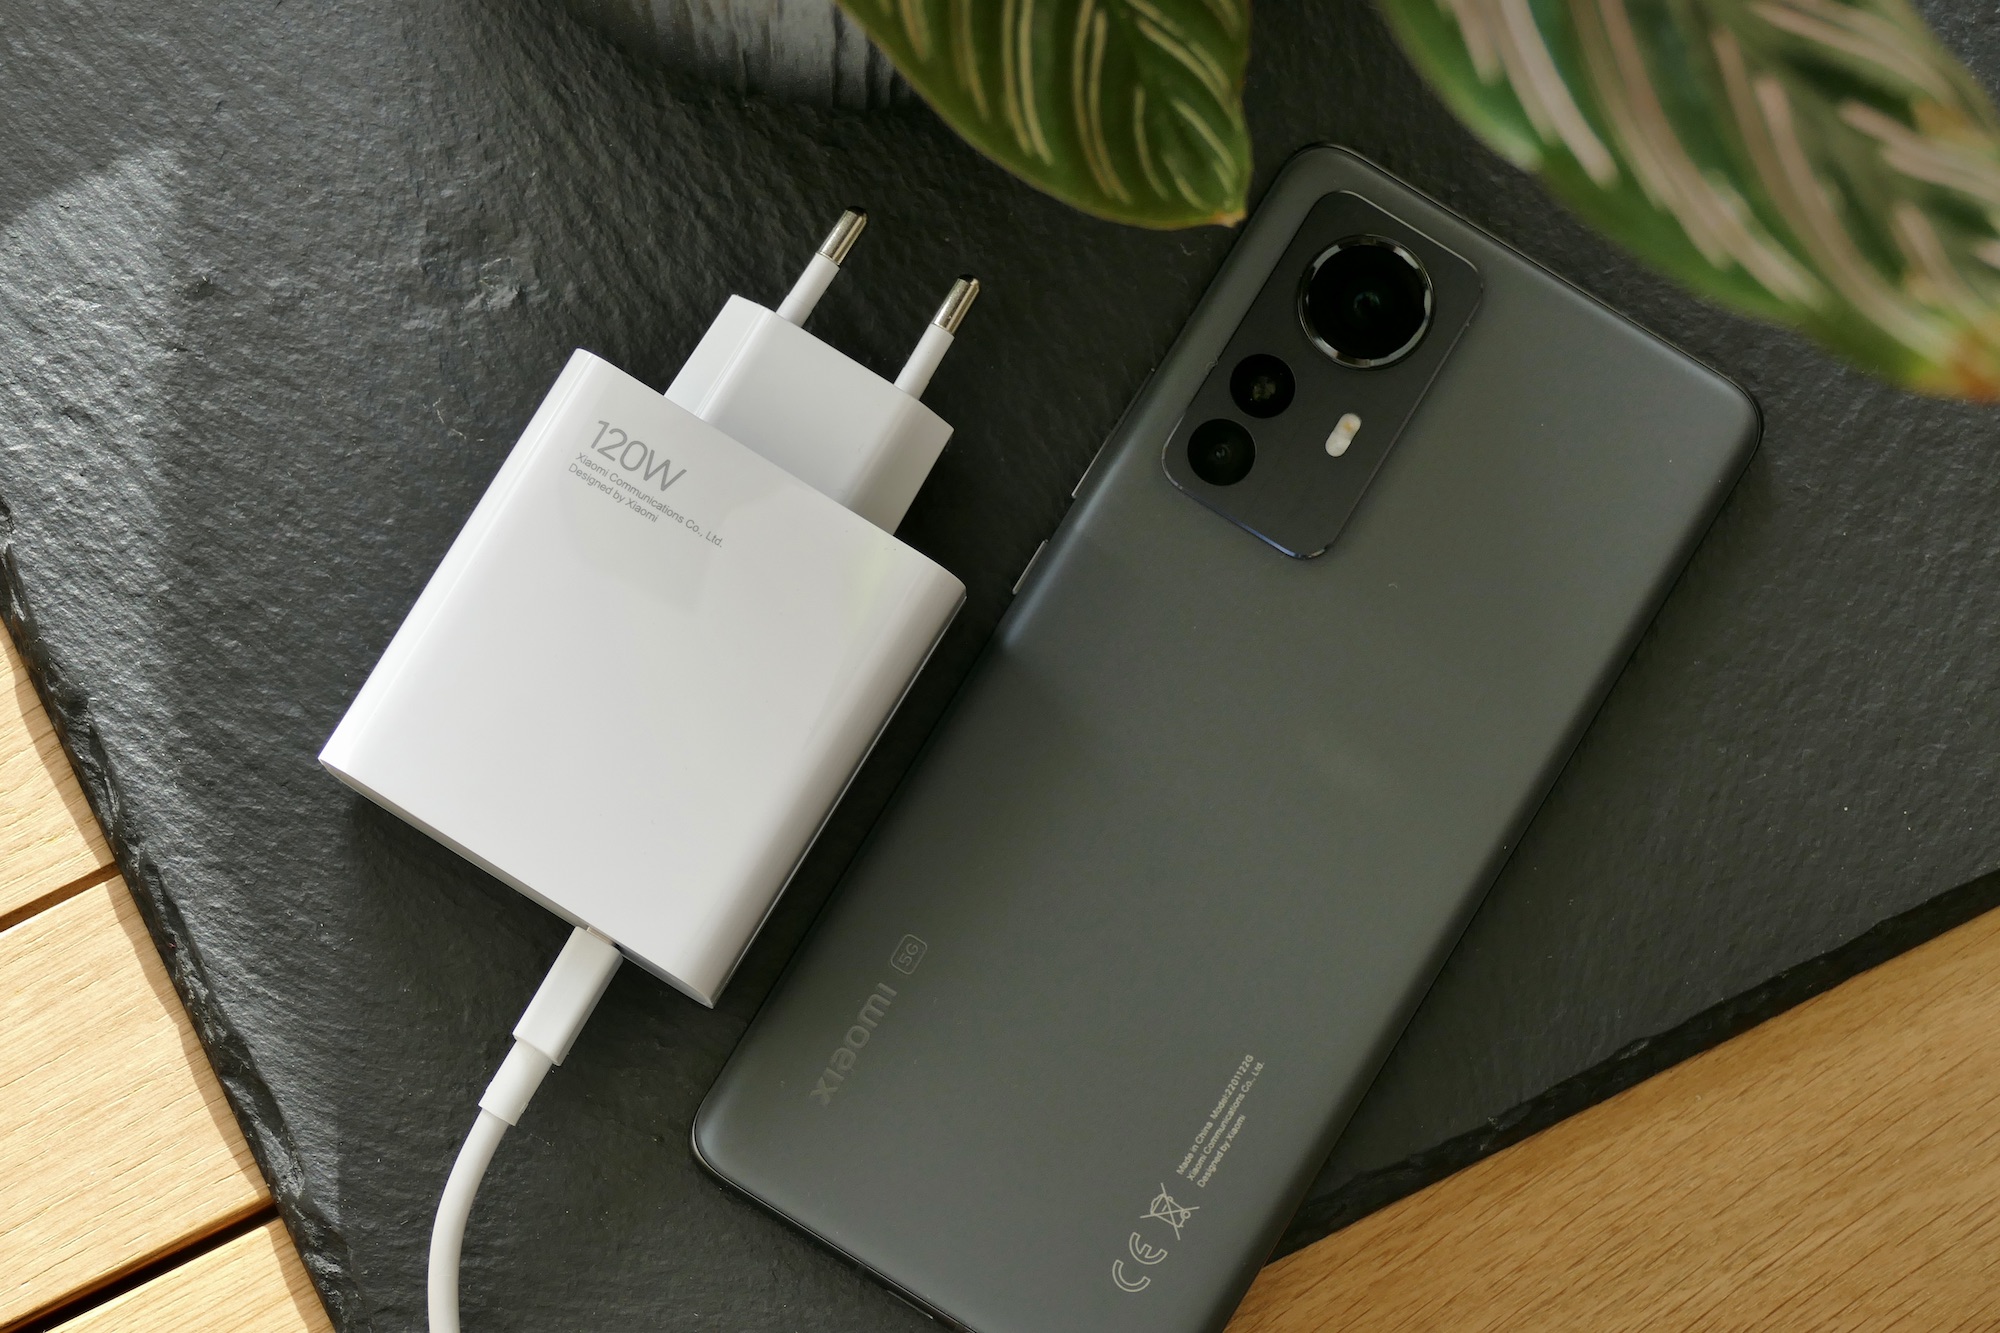 Top-tier Xiaomi 11T Pro with 120W charging is currently a steal on